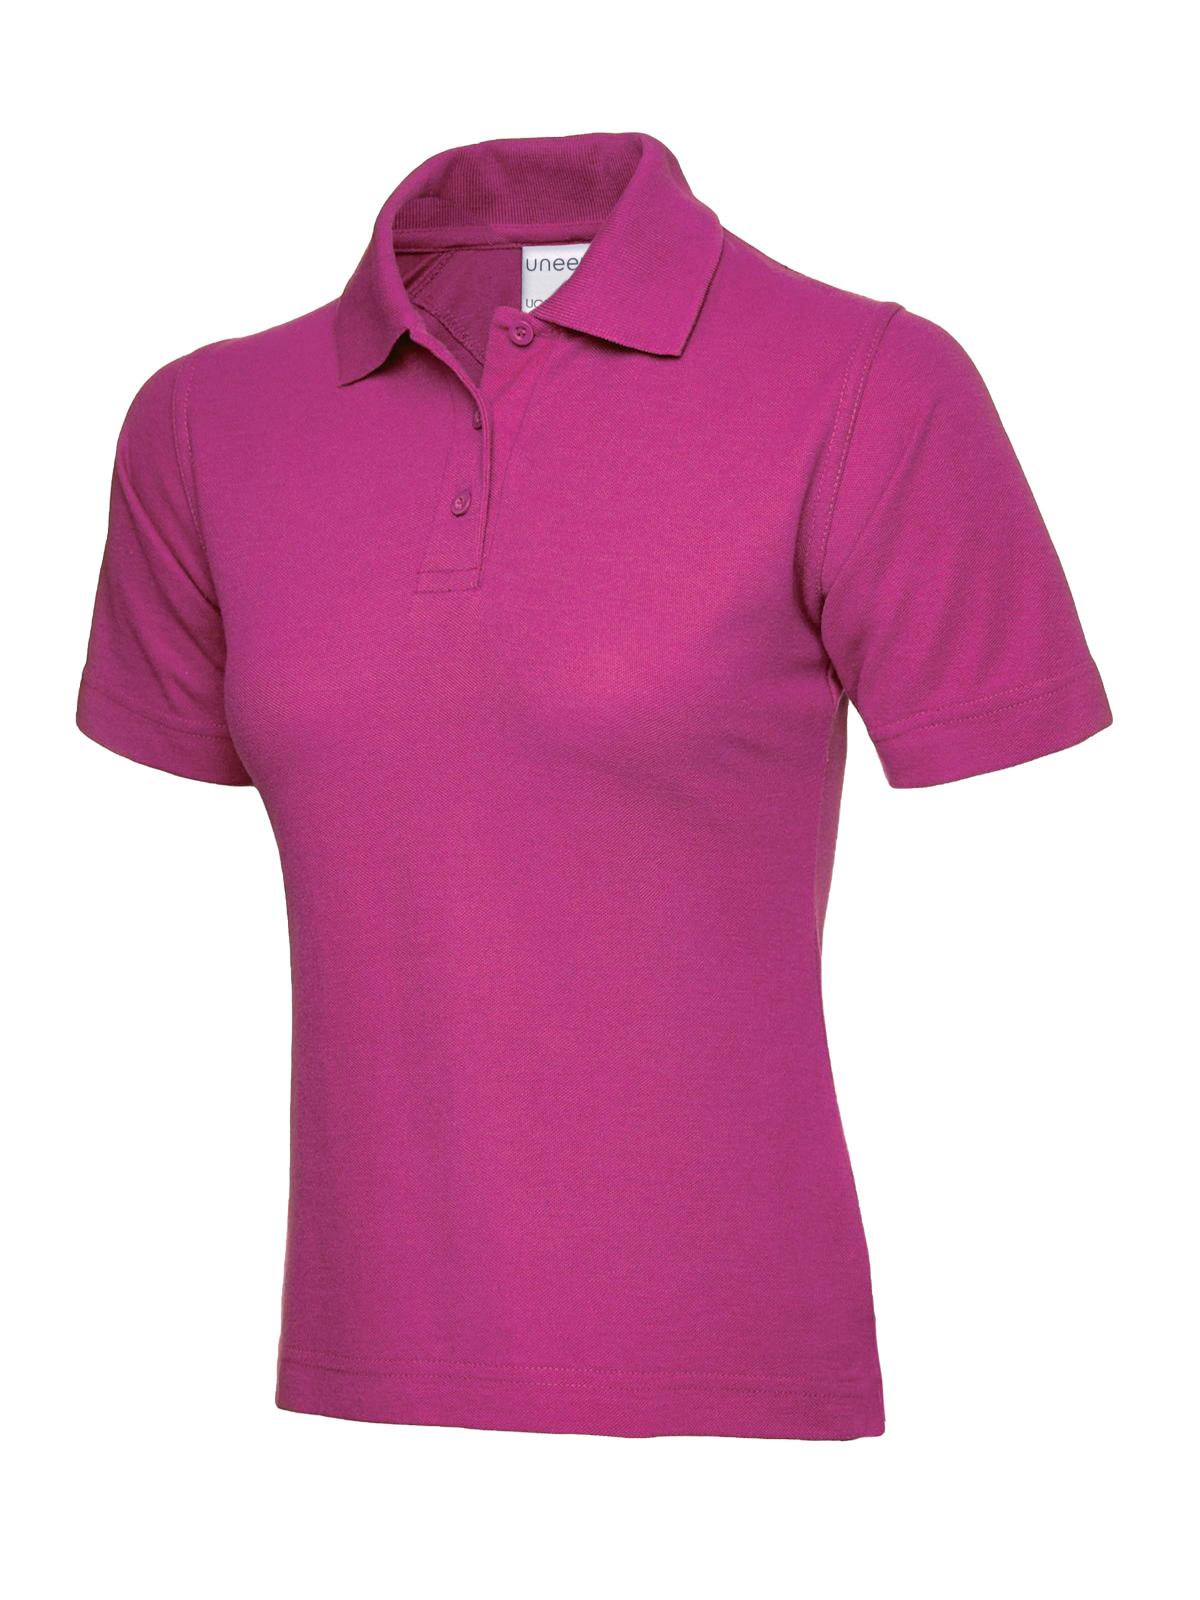 ladies_ultra_cotton_polo_shirt_hot_pink